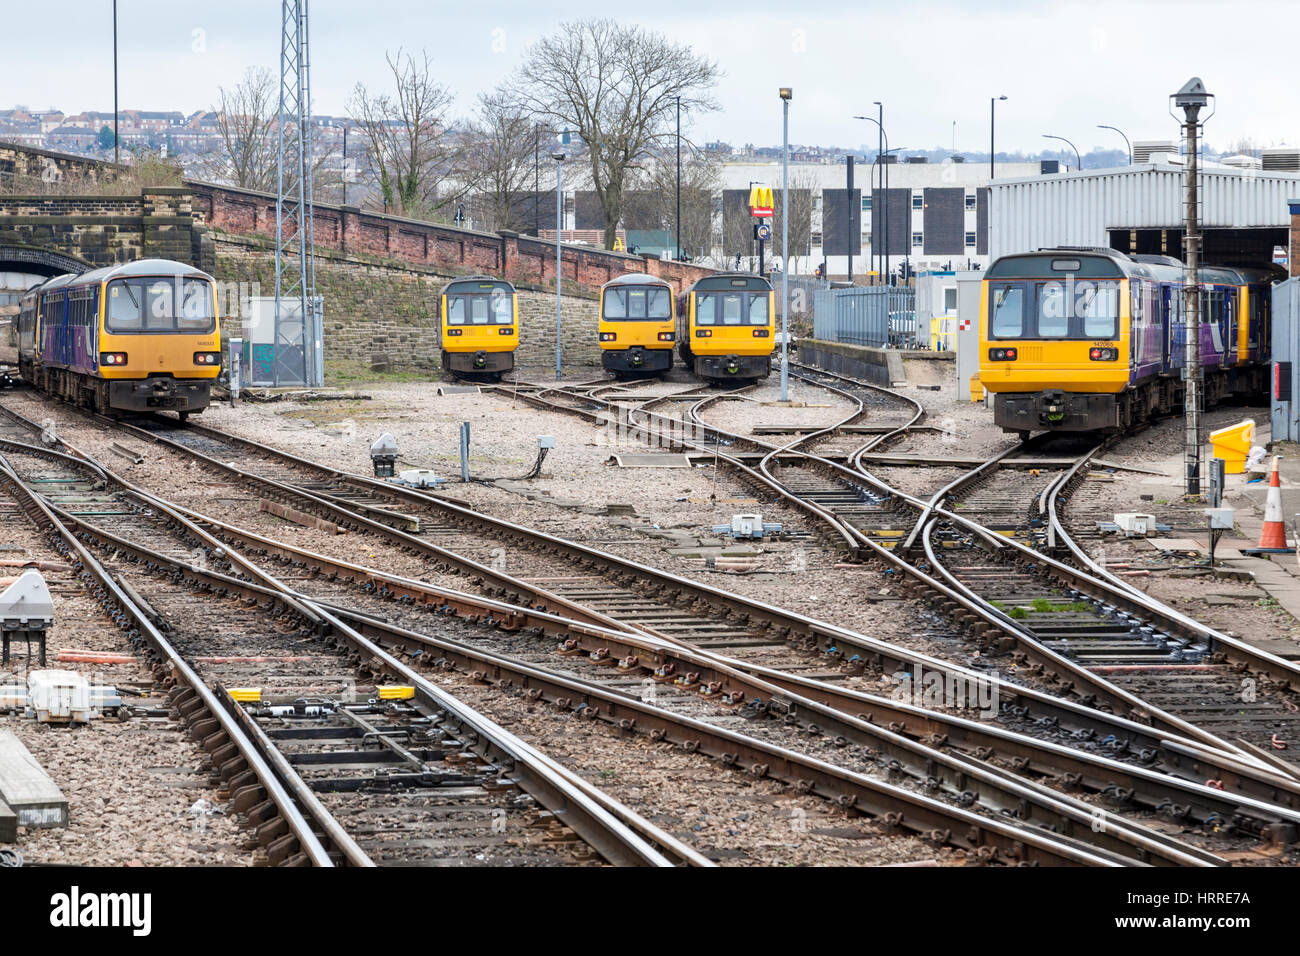 Five Northern Rail Diesel Multiple Unit (DMU) trains and railway track at Sheffield, England, UK Stock Photo